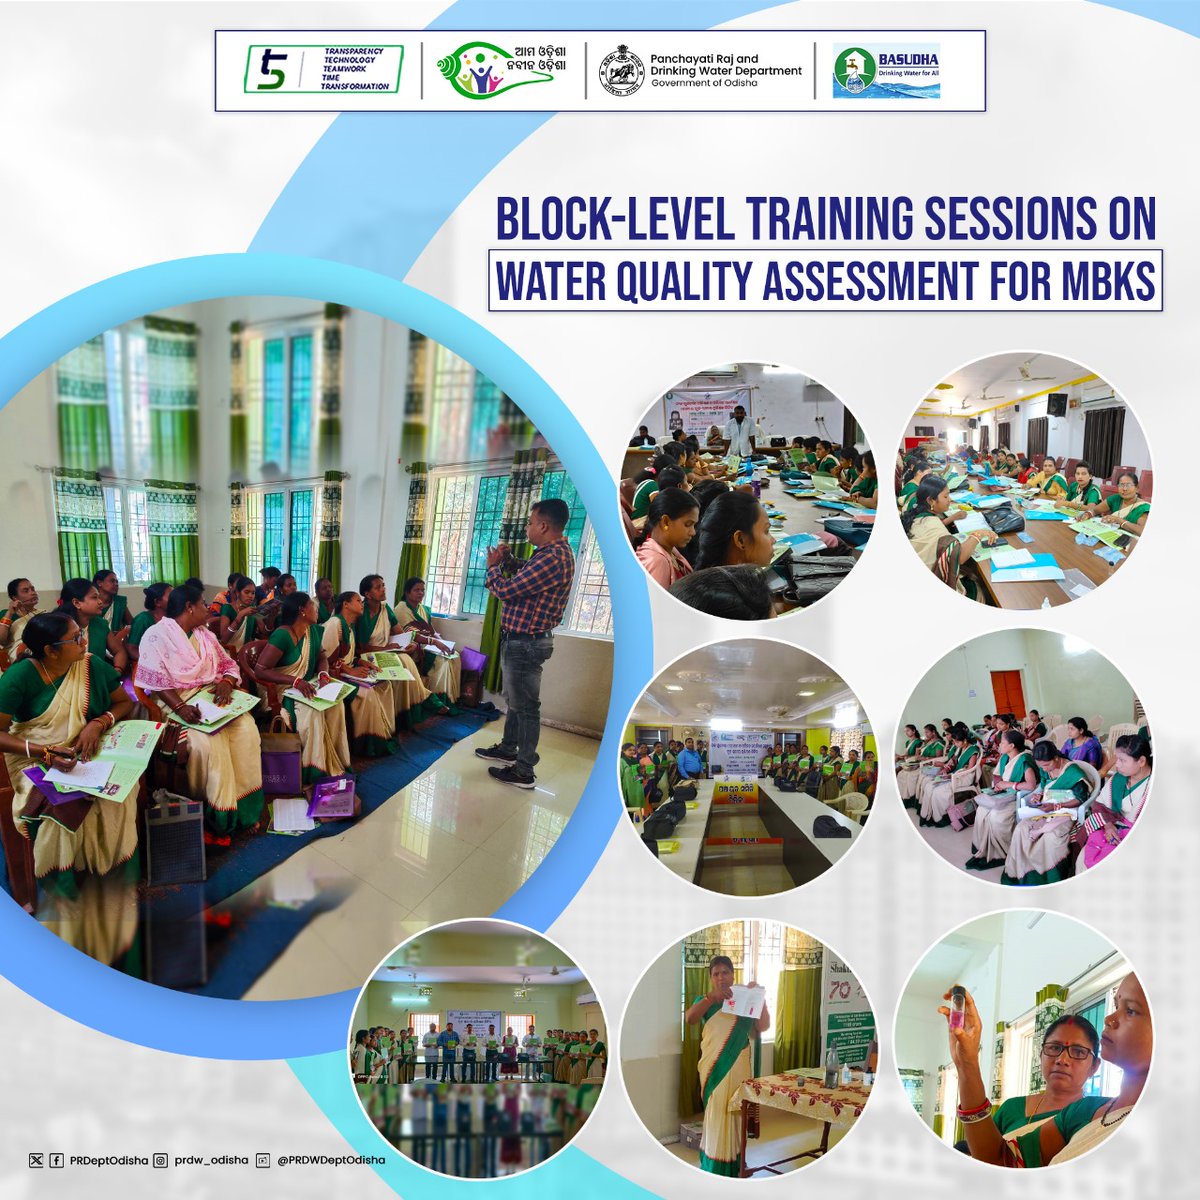 Training sessions on water quality assessment using #FieldTestingKits for #MasterBookKeepers are being conducted in different districts across #Odisha. 
This proactive effort aims to enhance community well-being and promote public awareness.
#CleanandSafeDrinkingWaterForAll